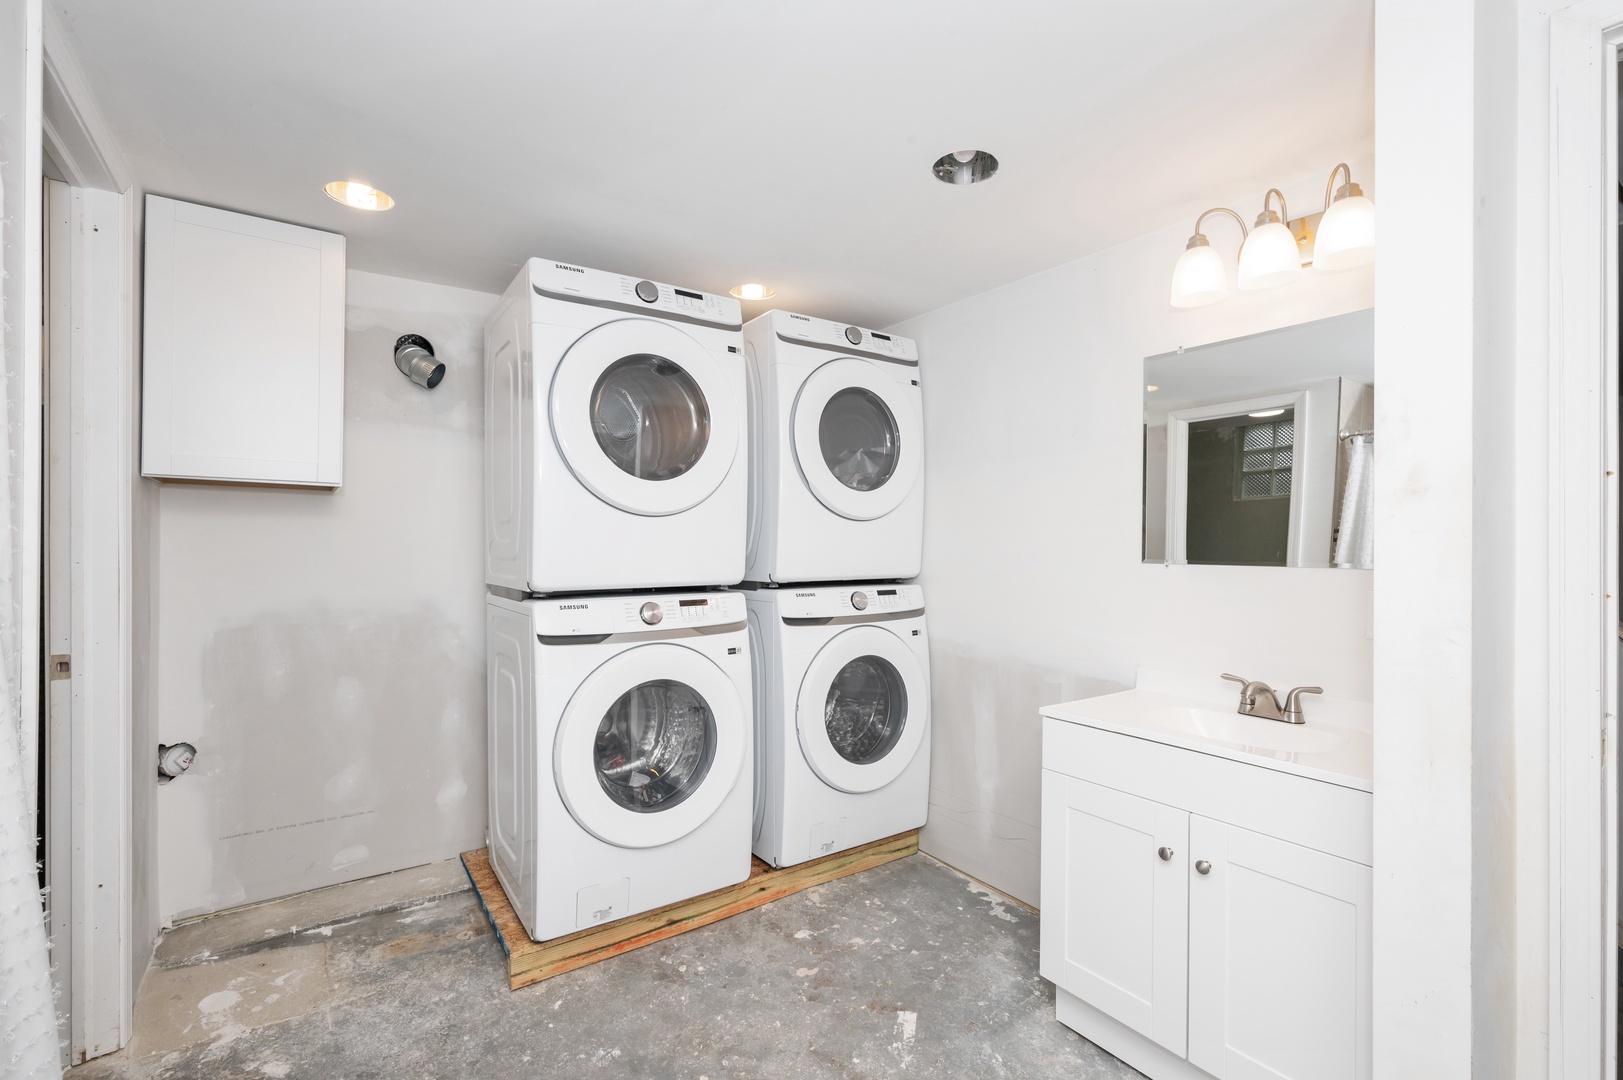 Private laundry is tucked away in the lower-level full bath, offering a shower